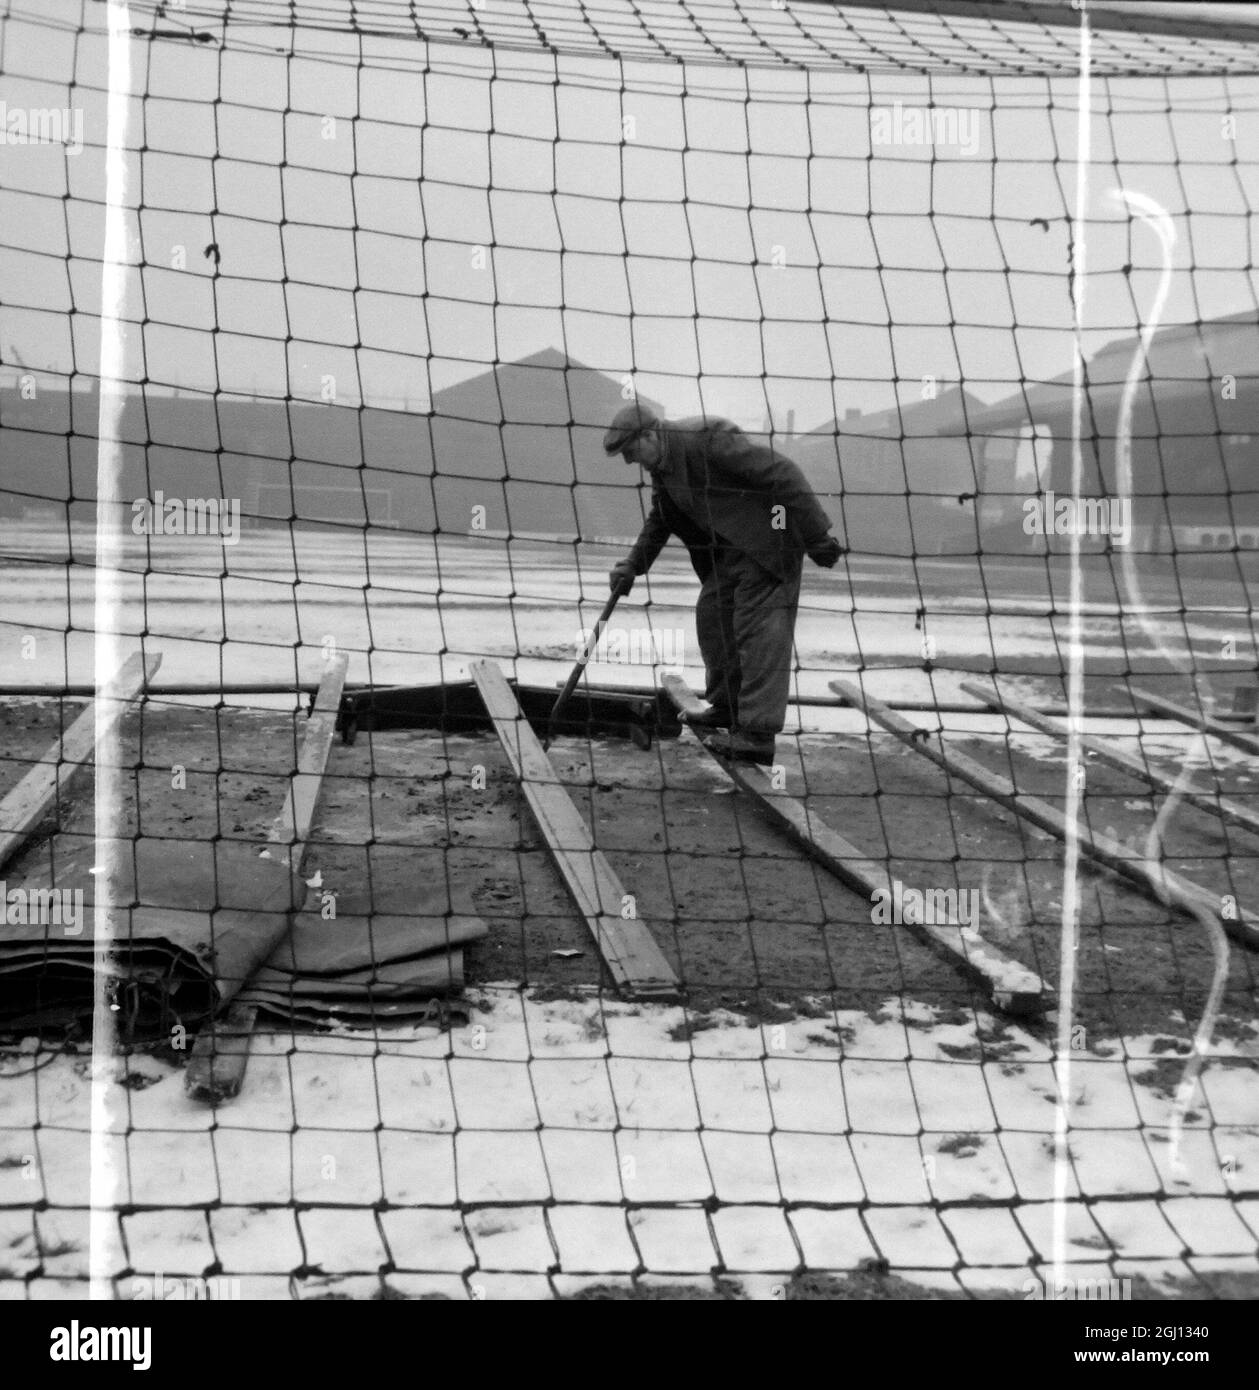 FOOTBALL FULHAM GROUND INSPECTED GROUNDSMAN MR PURDY 4 JANUARY 1962 Stock Photo